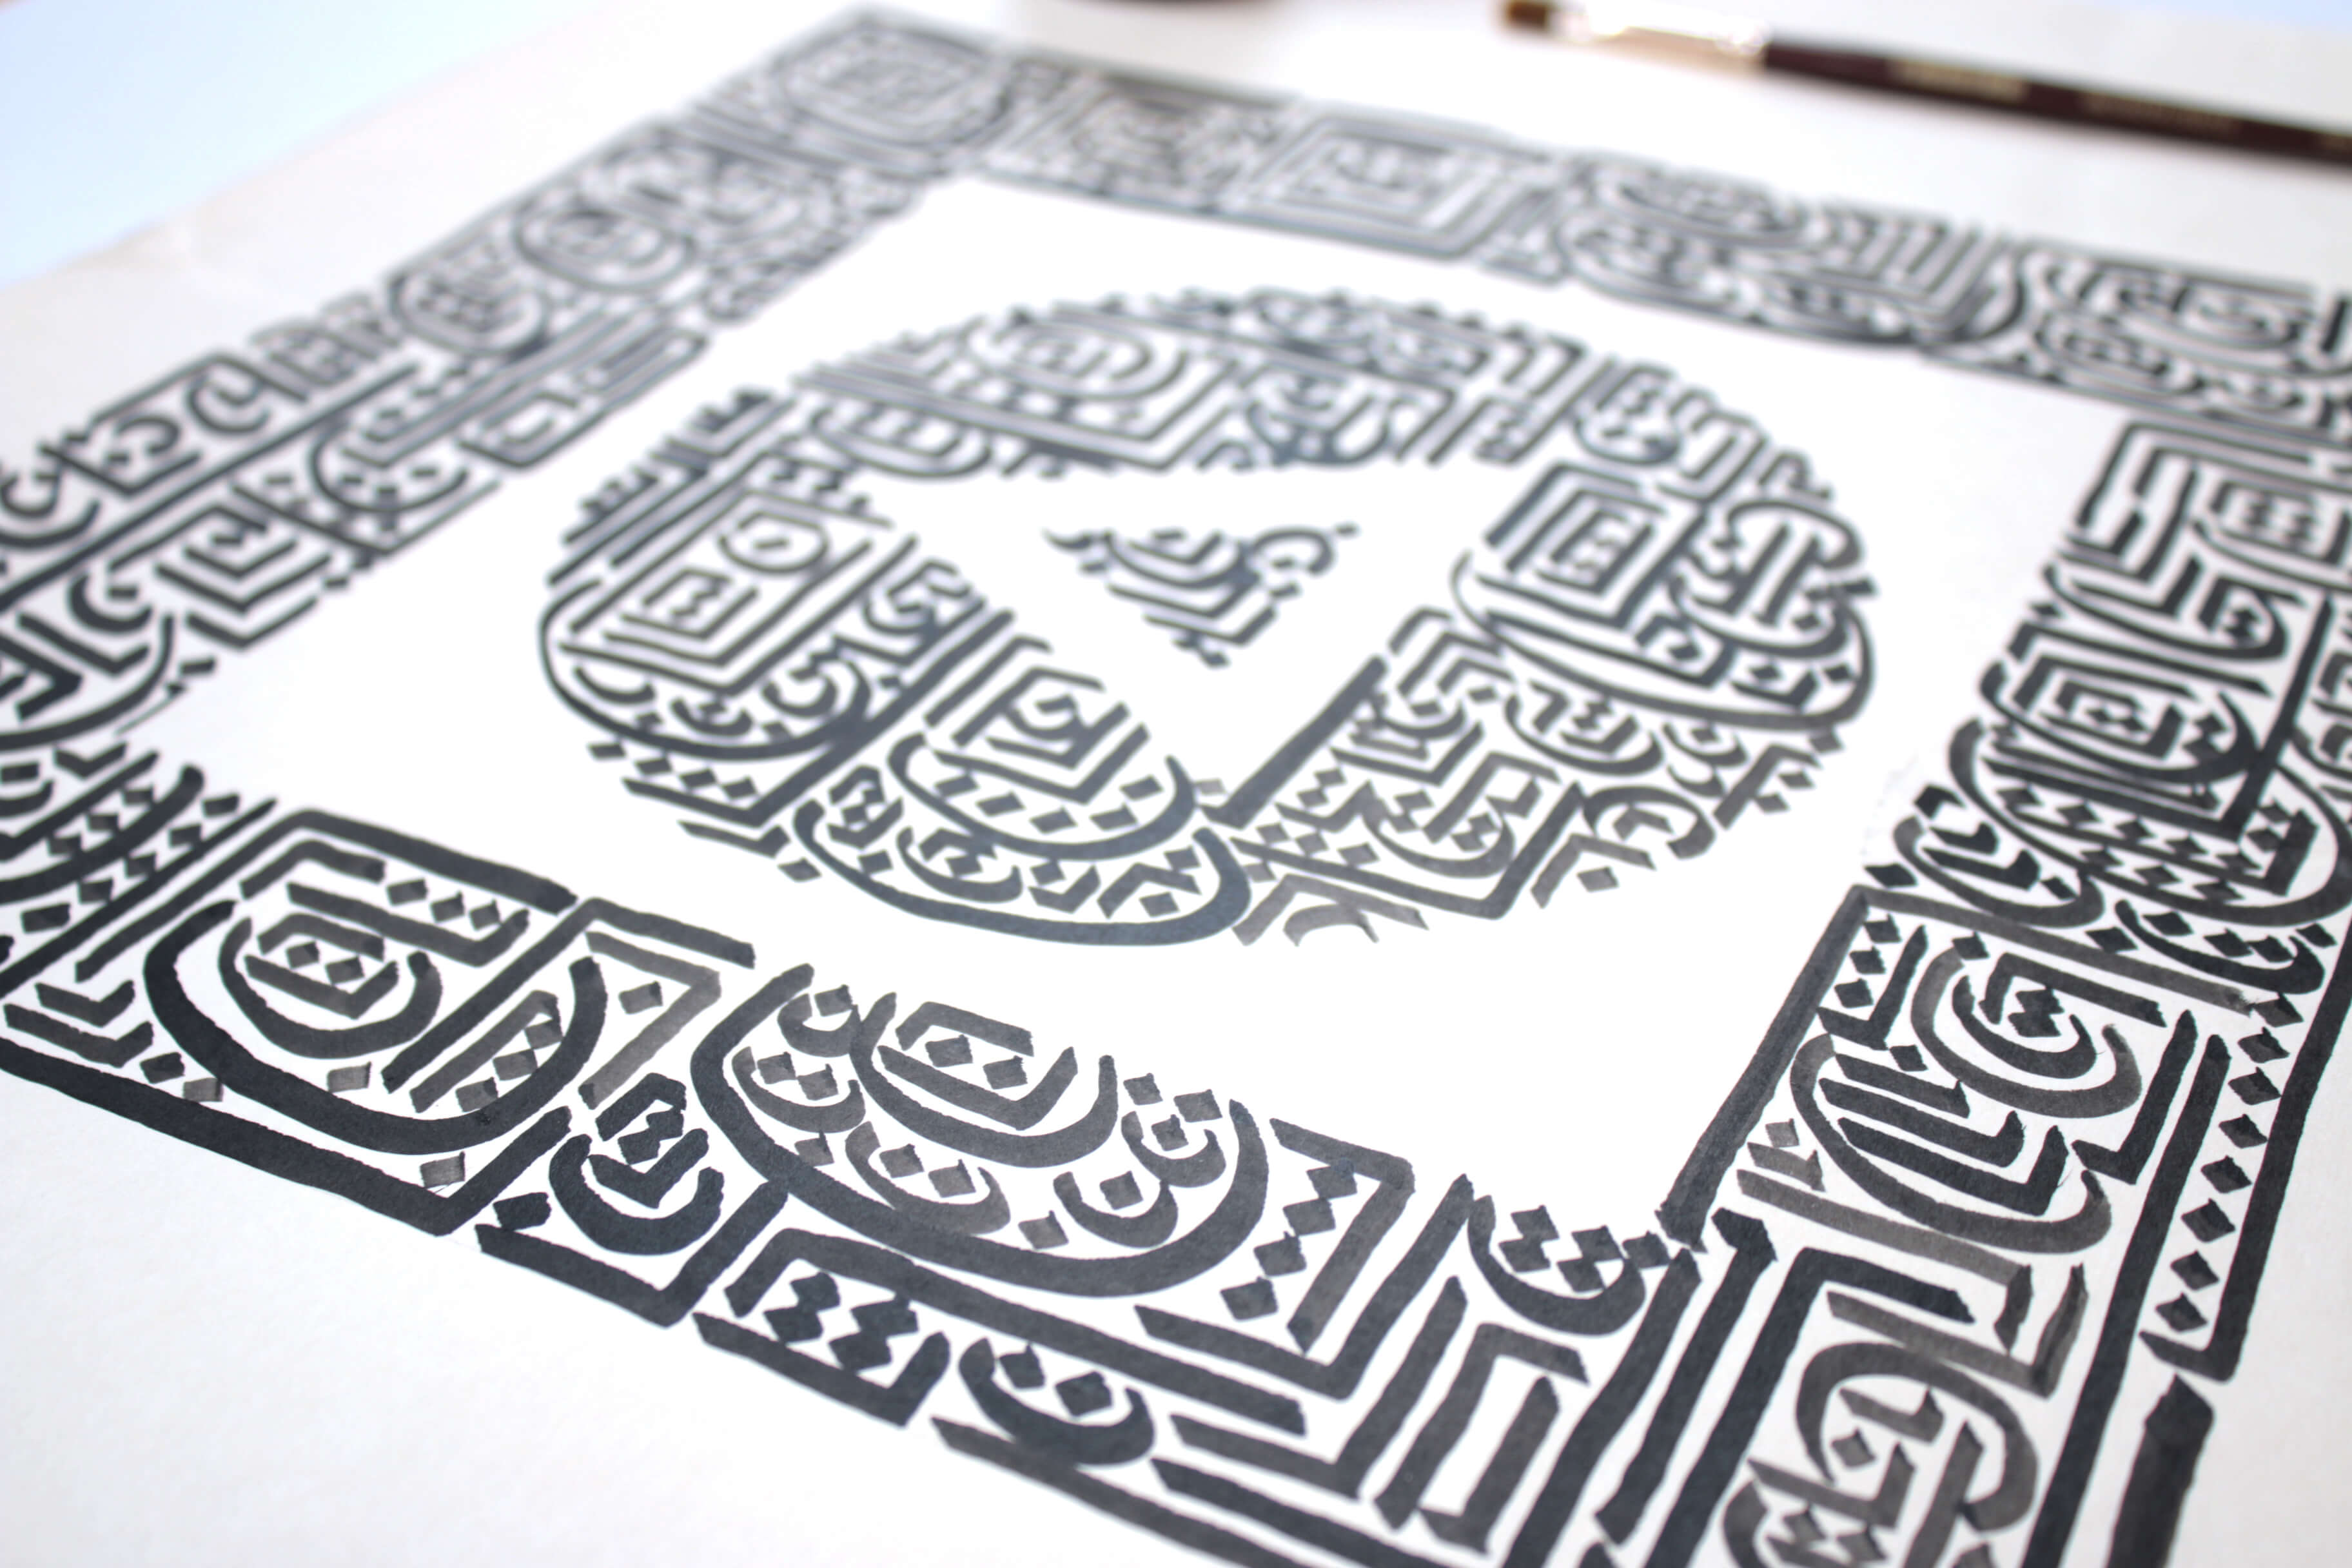 Learn calligraphy, improve drawing skills, Arts